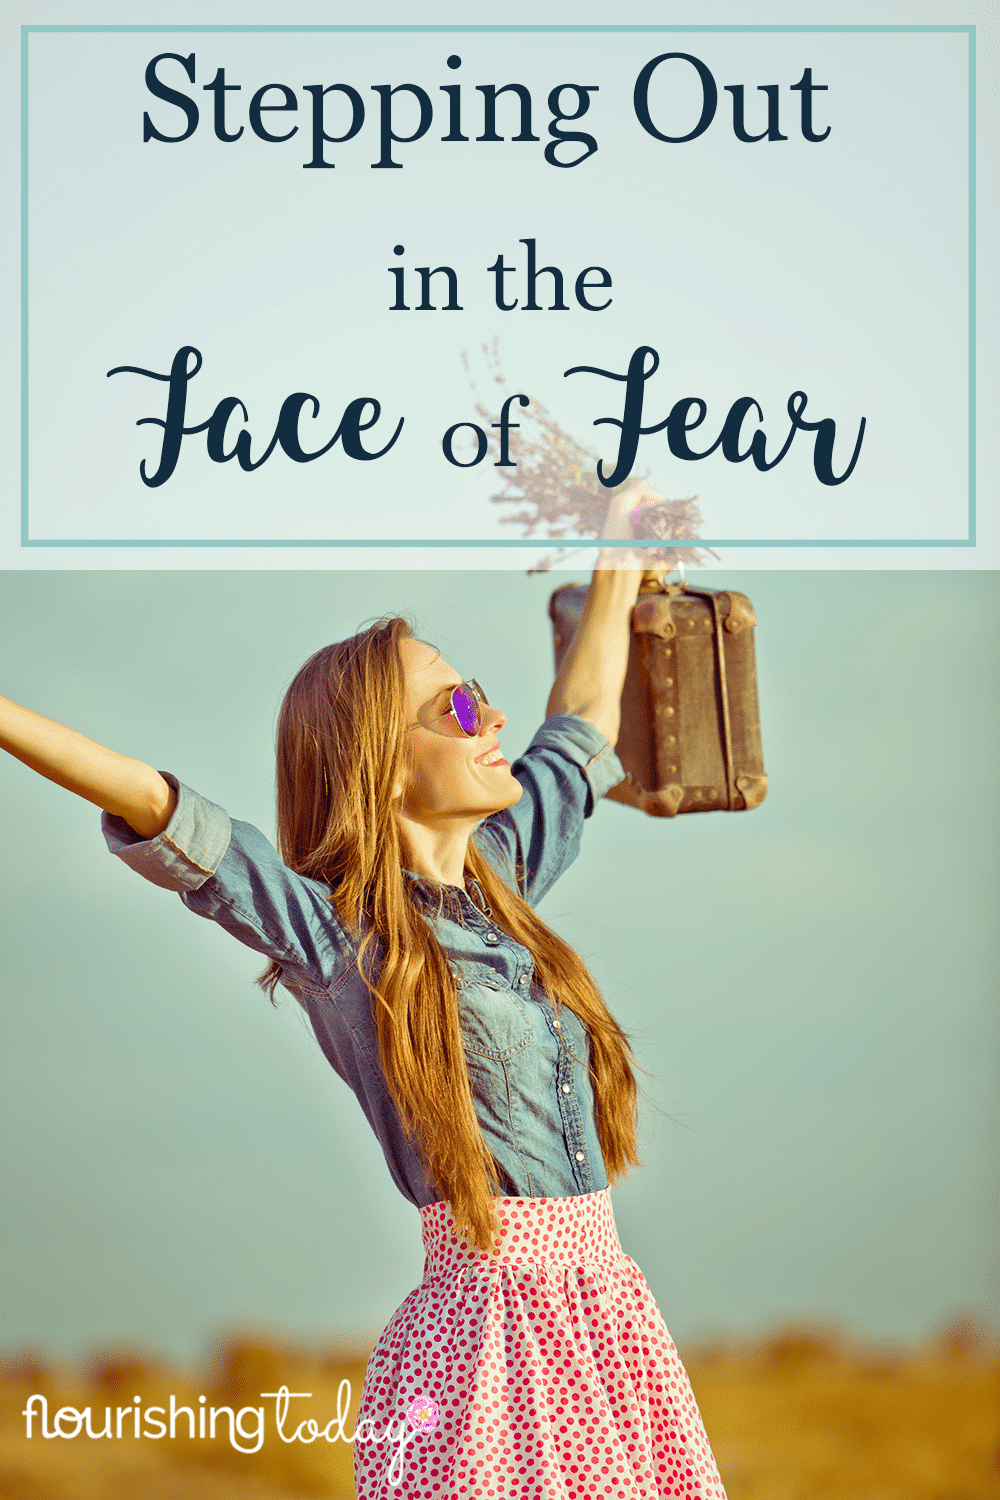 Is God calling you to do something outside your comfort zone? Are you shrinking back in fear? Stepping out in the face of fear can lead you to great things!